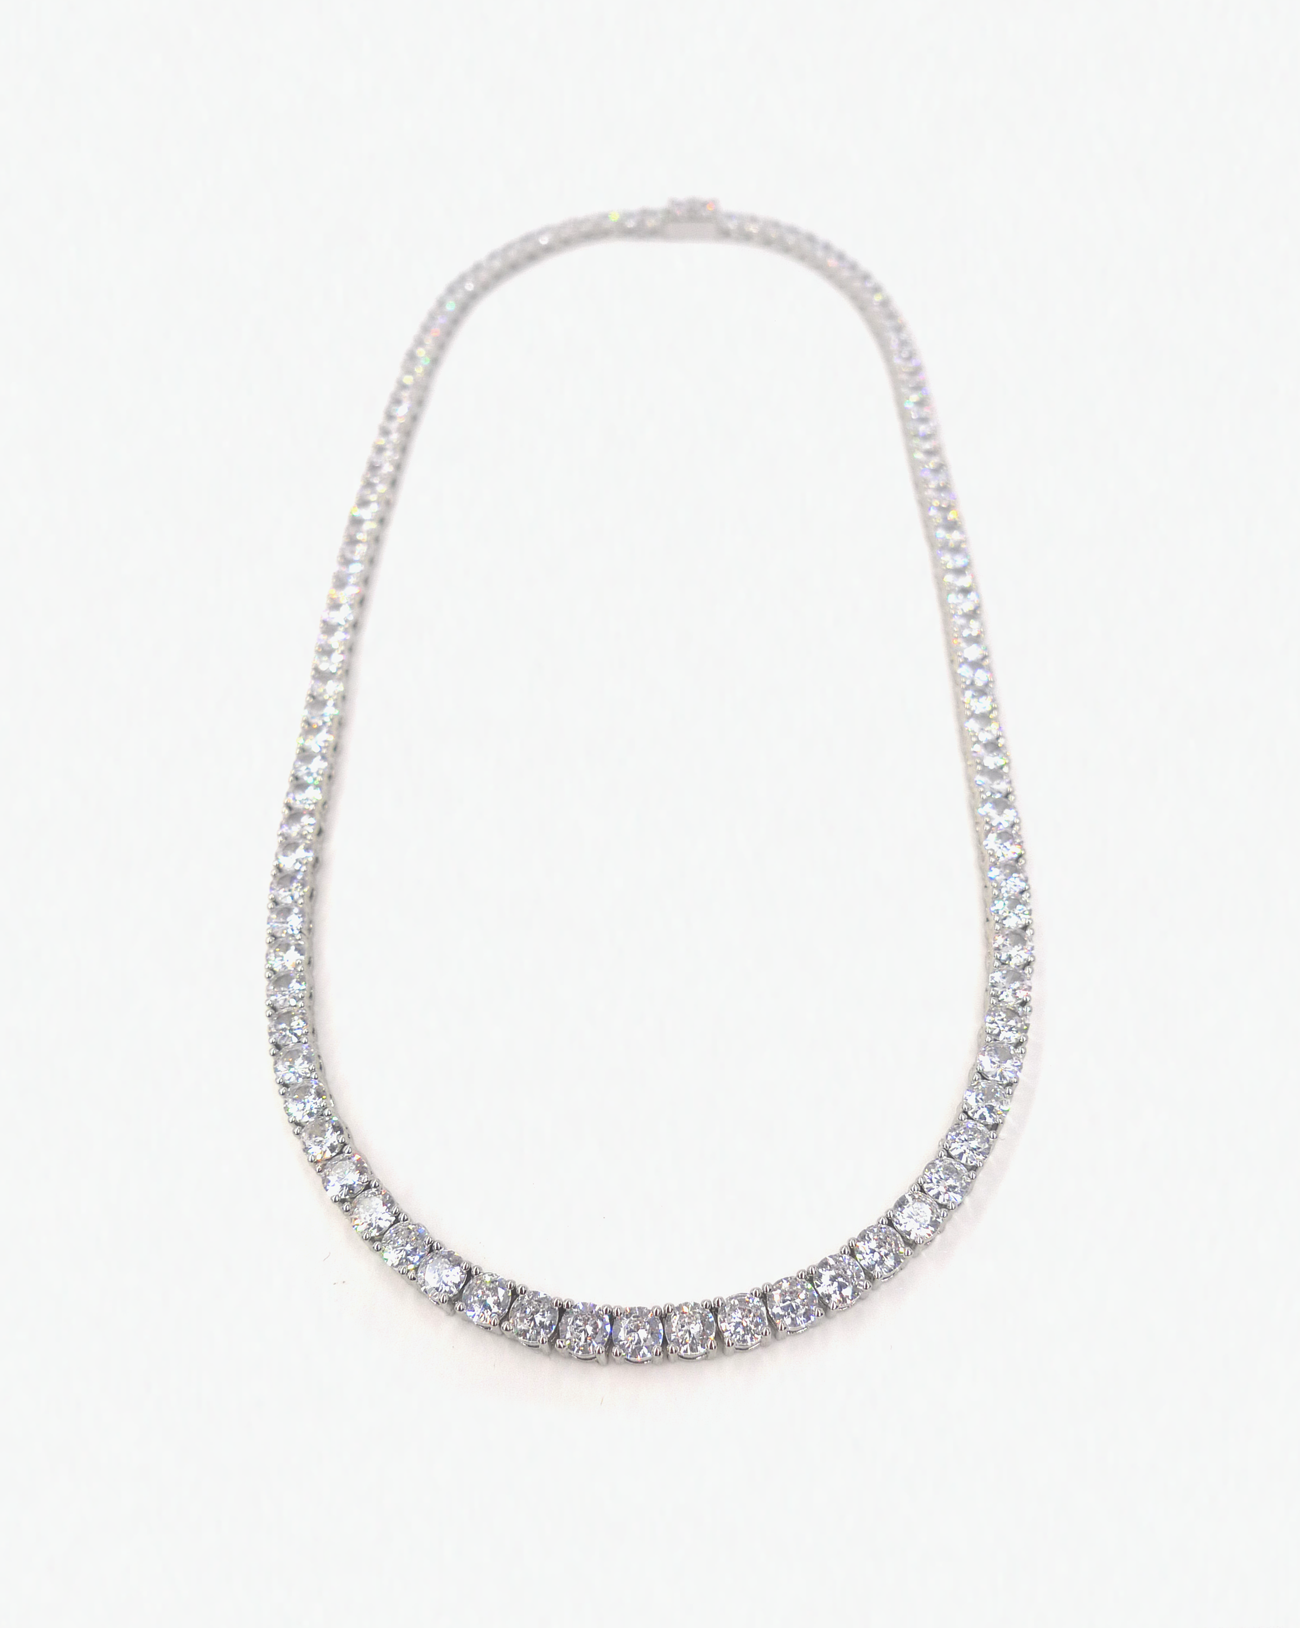 Tennis Necklace - White Gold